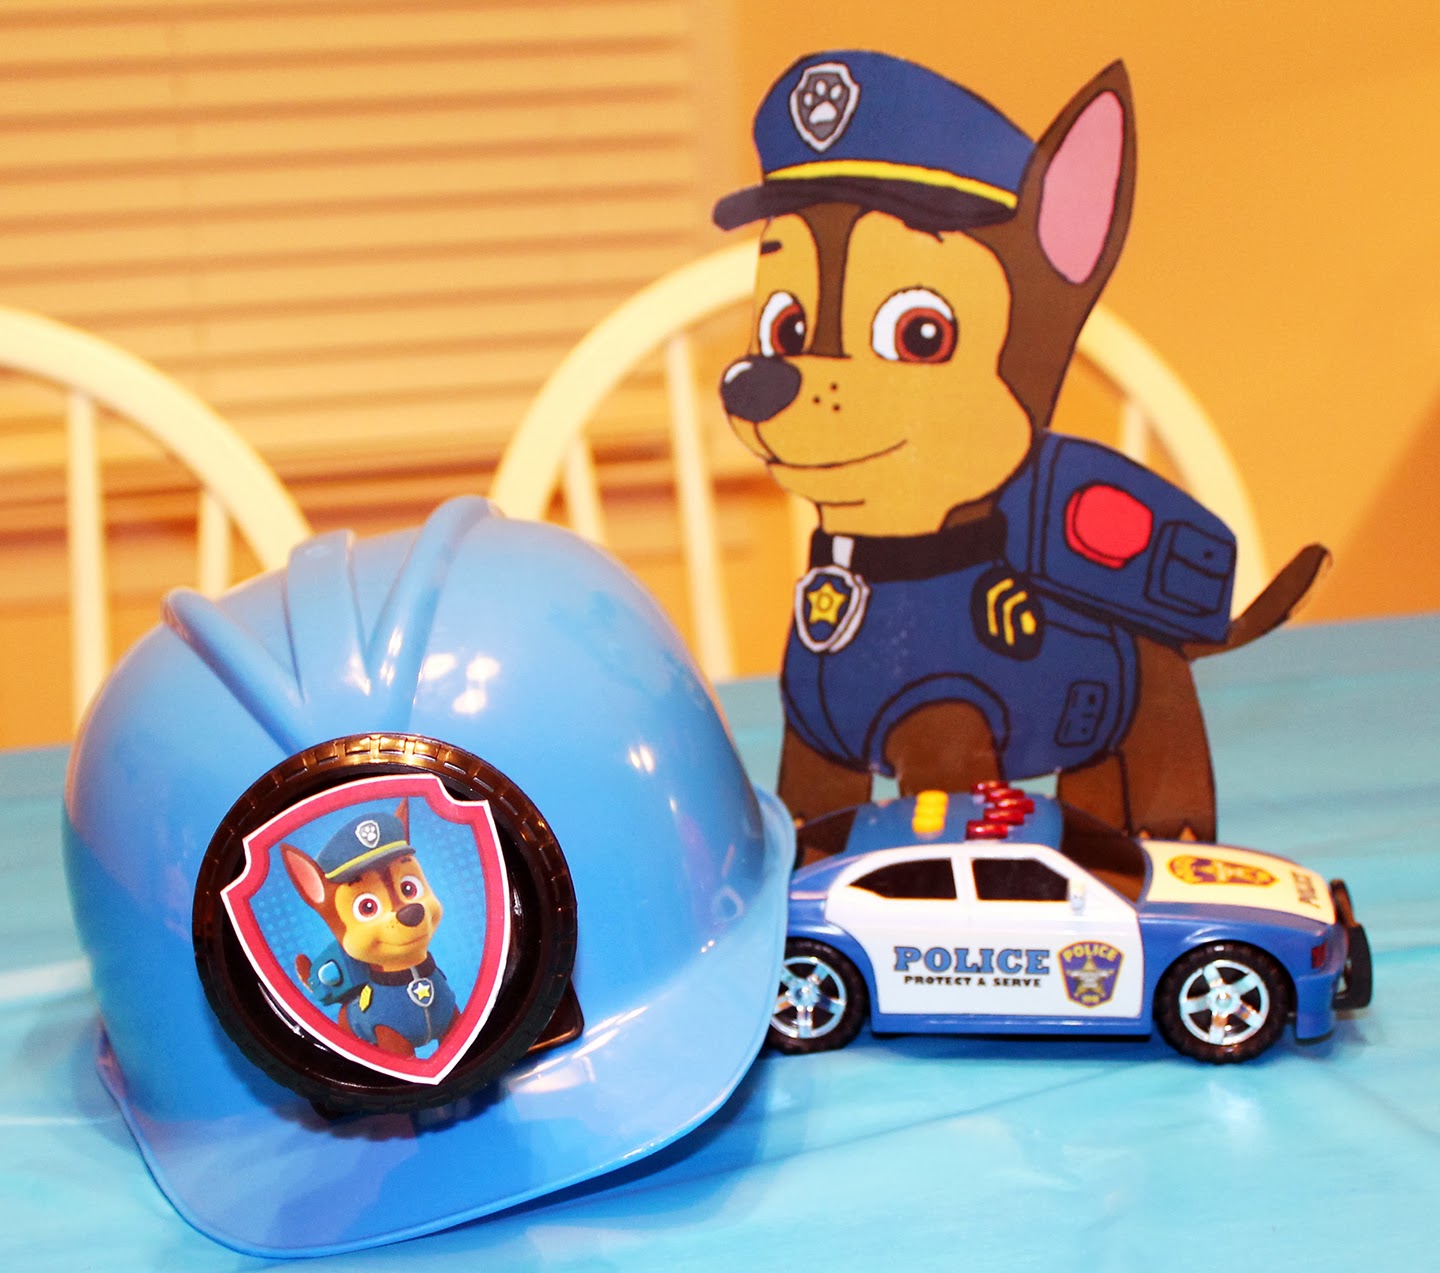 Download - Paw Patrol Cake Chase , HD Wallpaper & Backgrounds